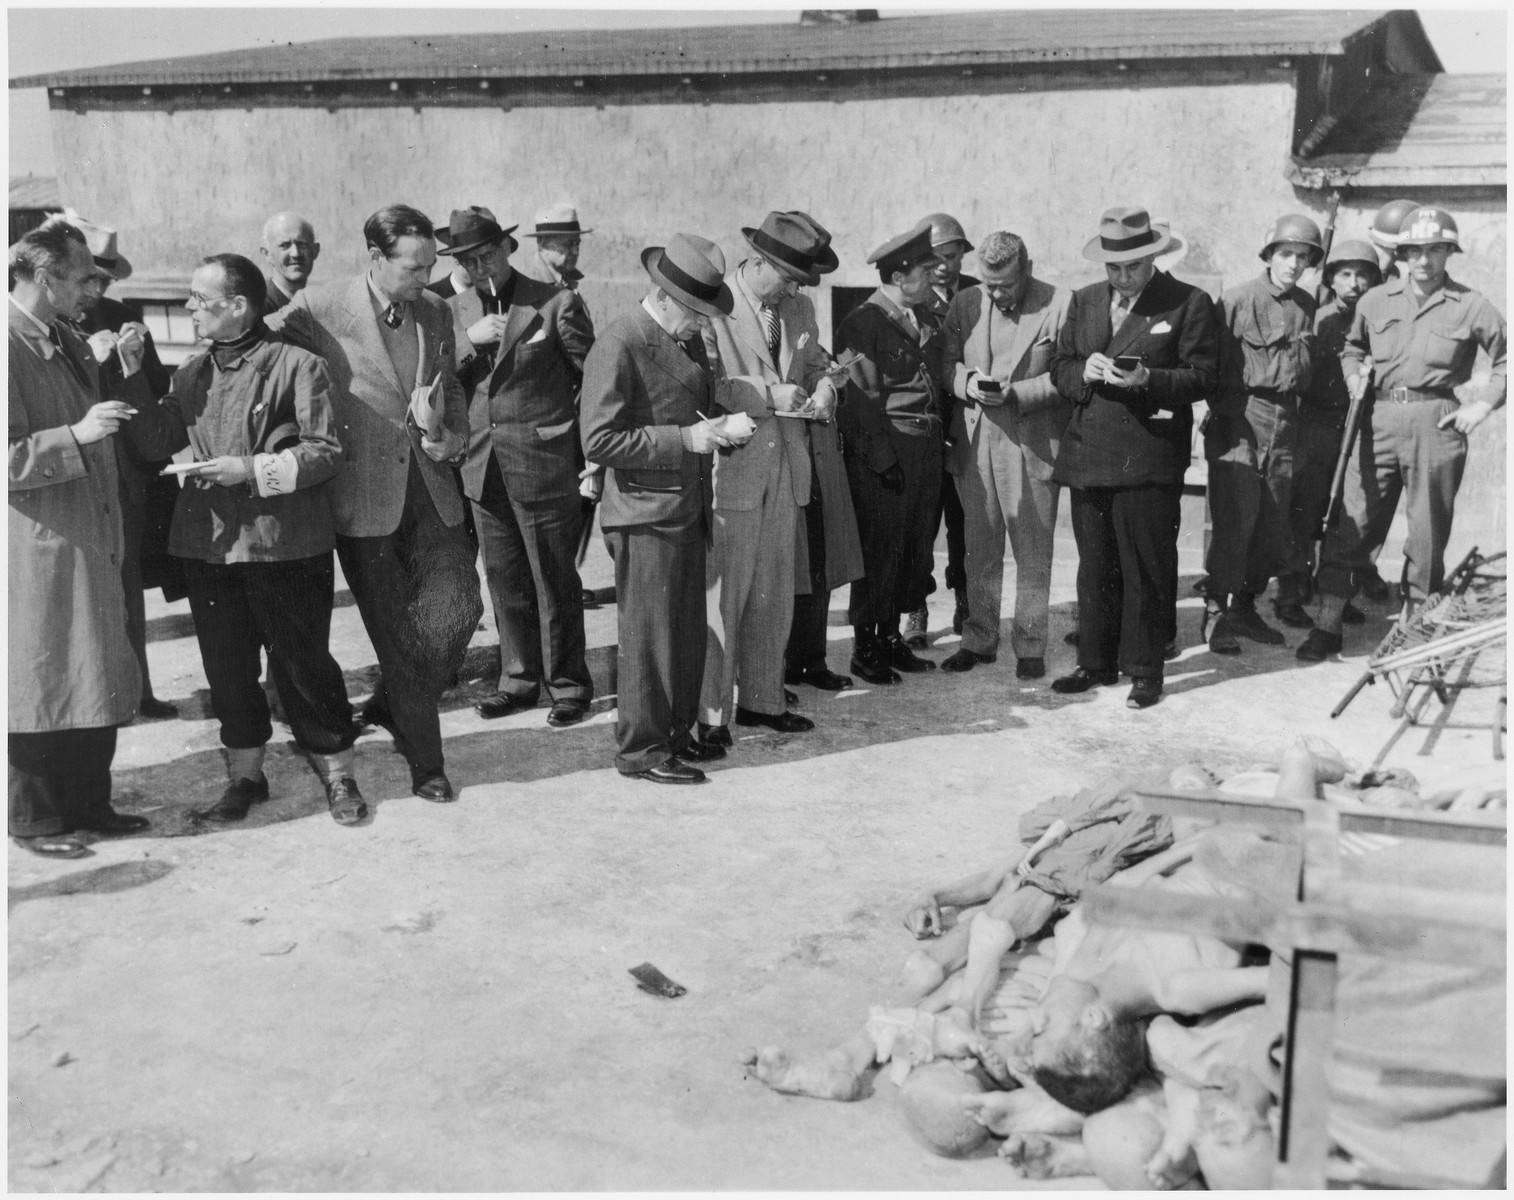 Journalists, accompanied by American military police, conduct an inspection tour of the newly liberated Buchenwald concentration camp.